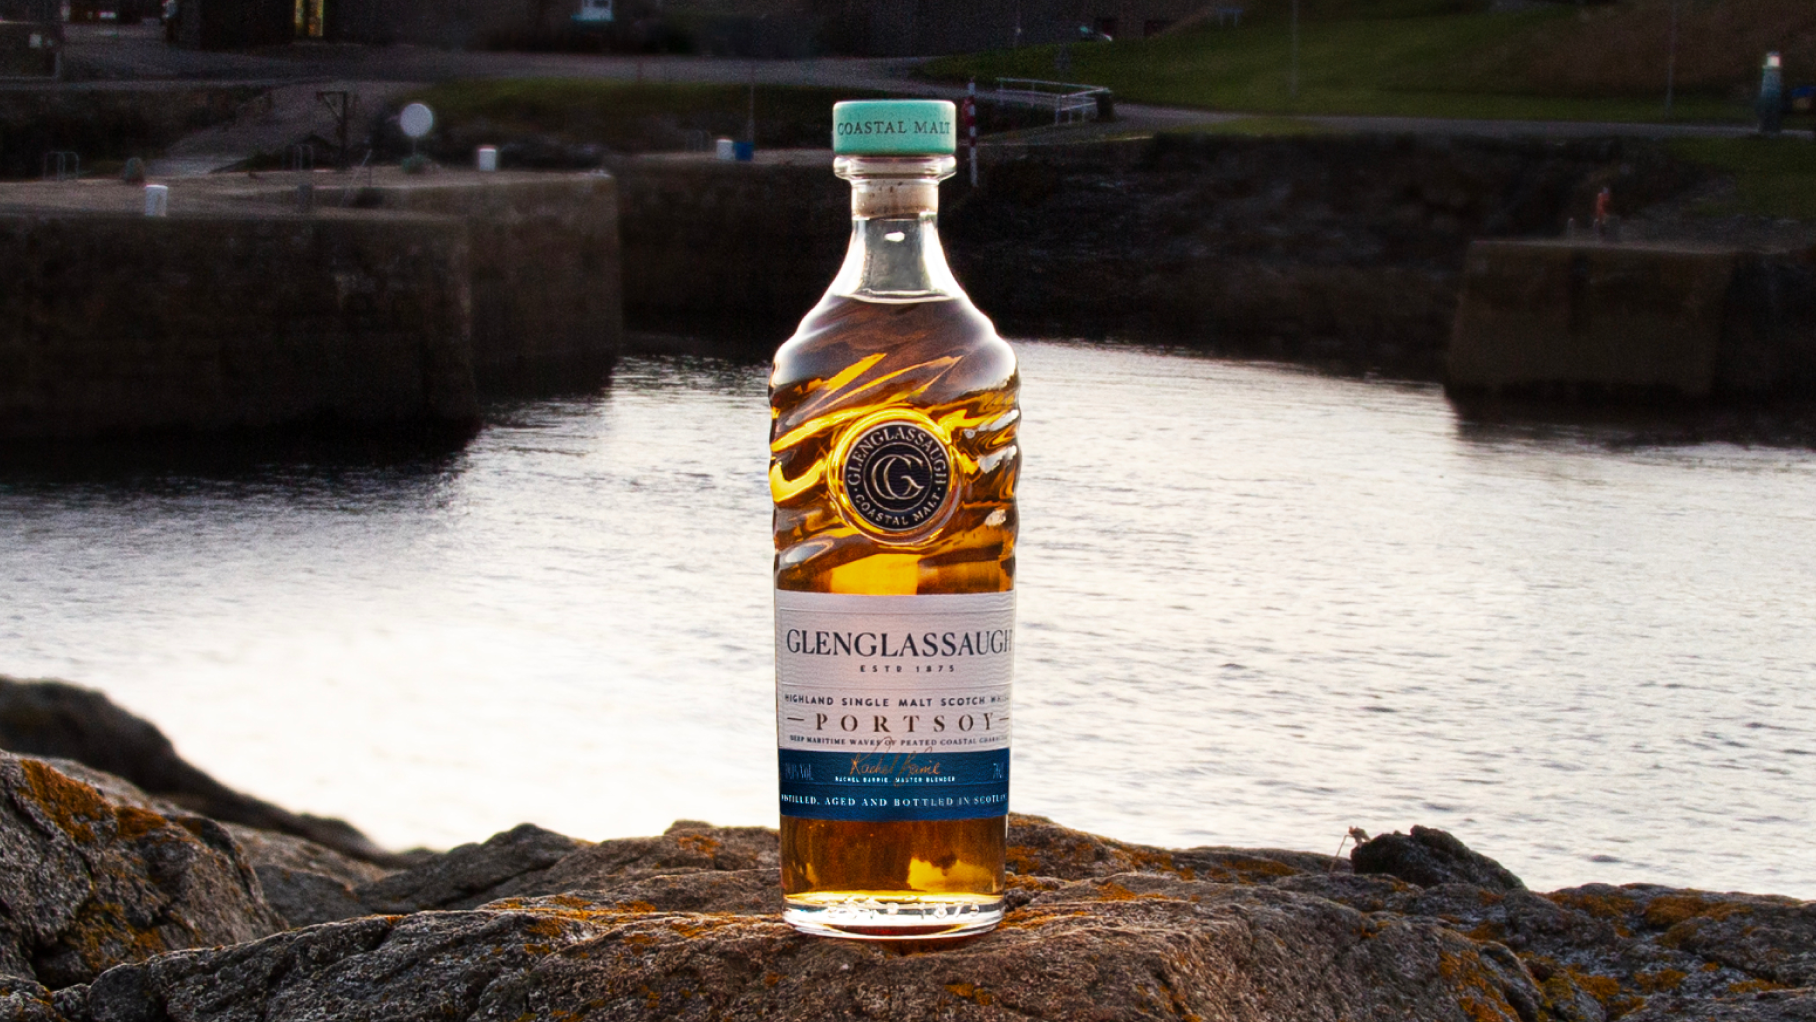 Bottle of Portsoy Glenglassaugh and the distillery behind it.